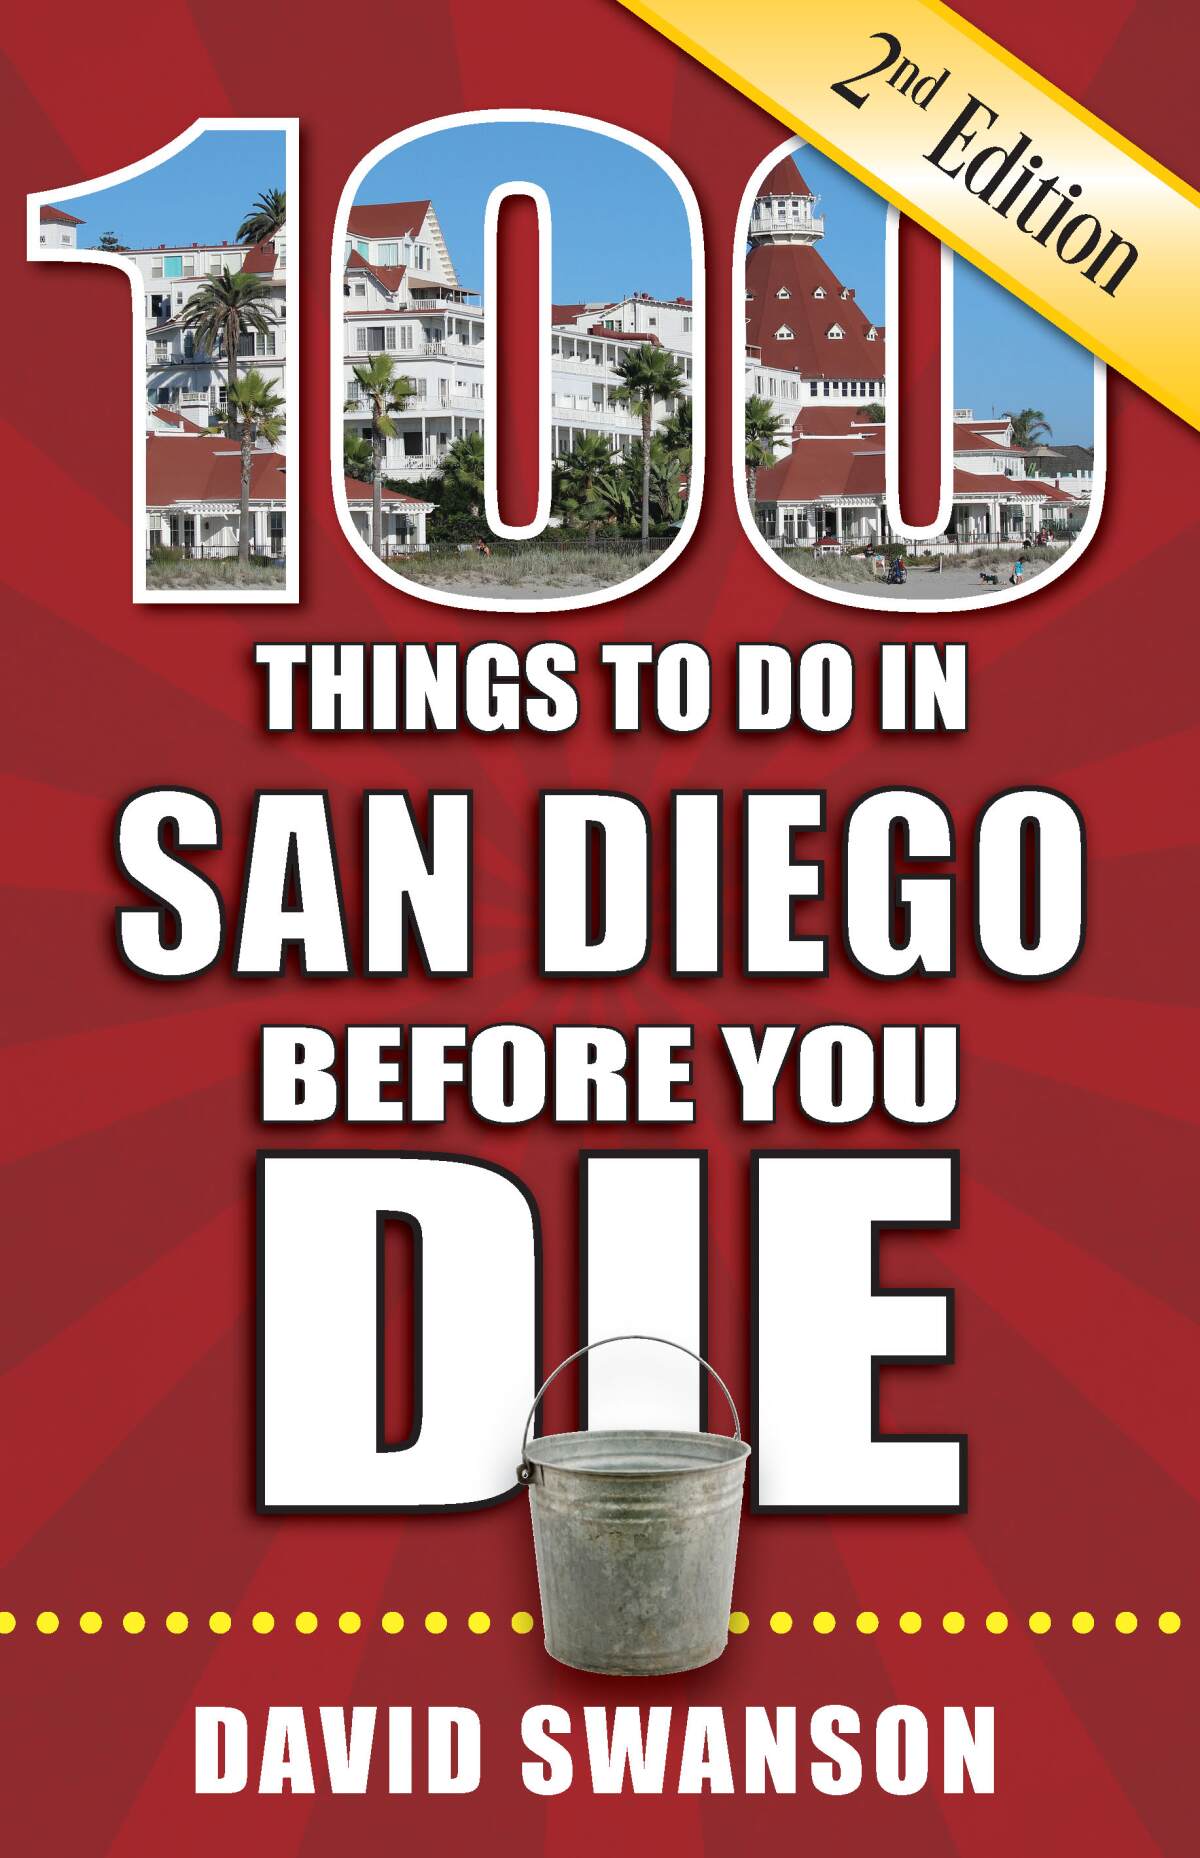 Several locations in Point Loma and Ocean Beach are included in "100 Things to Do in San Diego Before You Die."